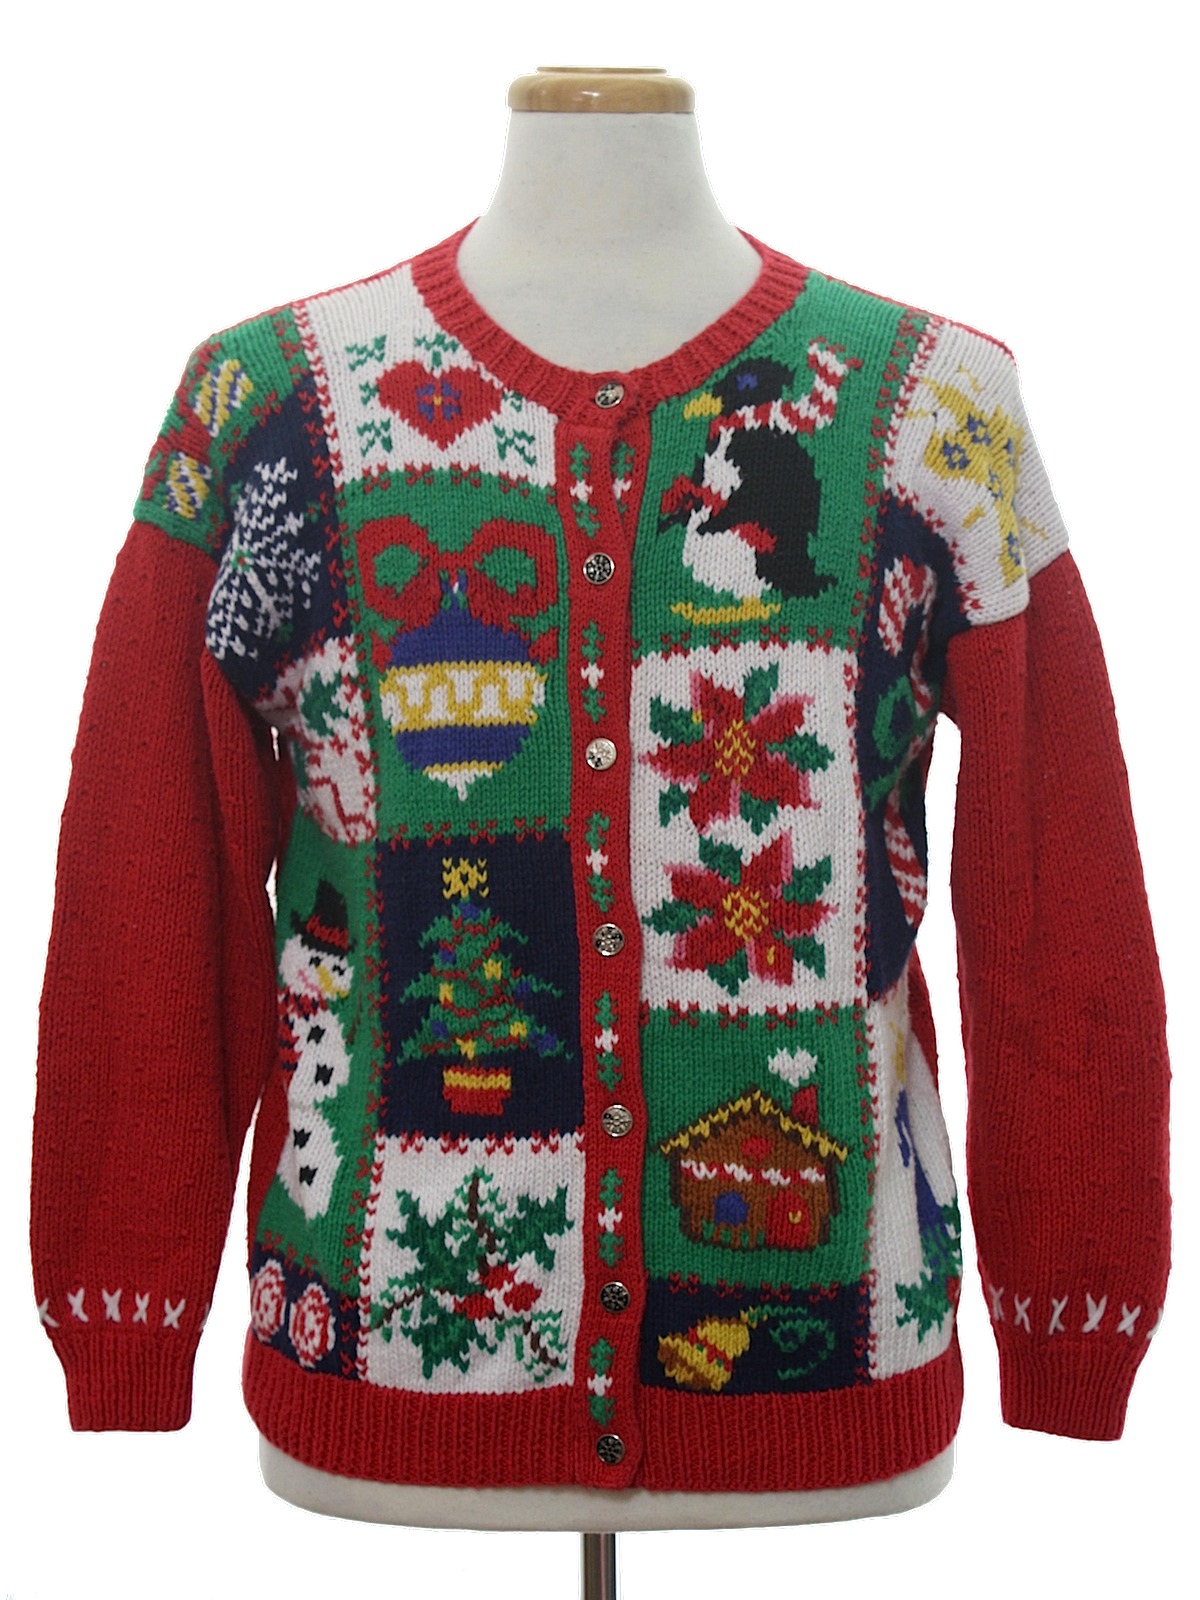 Ugly Christmas Sweater: retro look -Ashley- Unisex red, green, navy ...